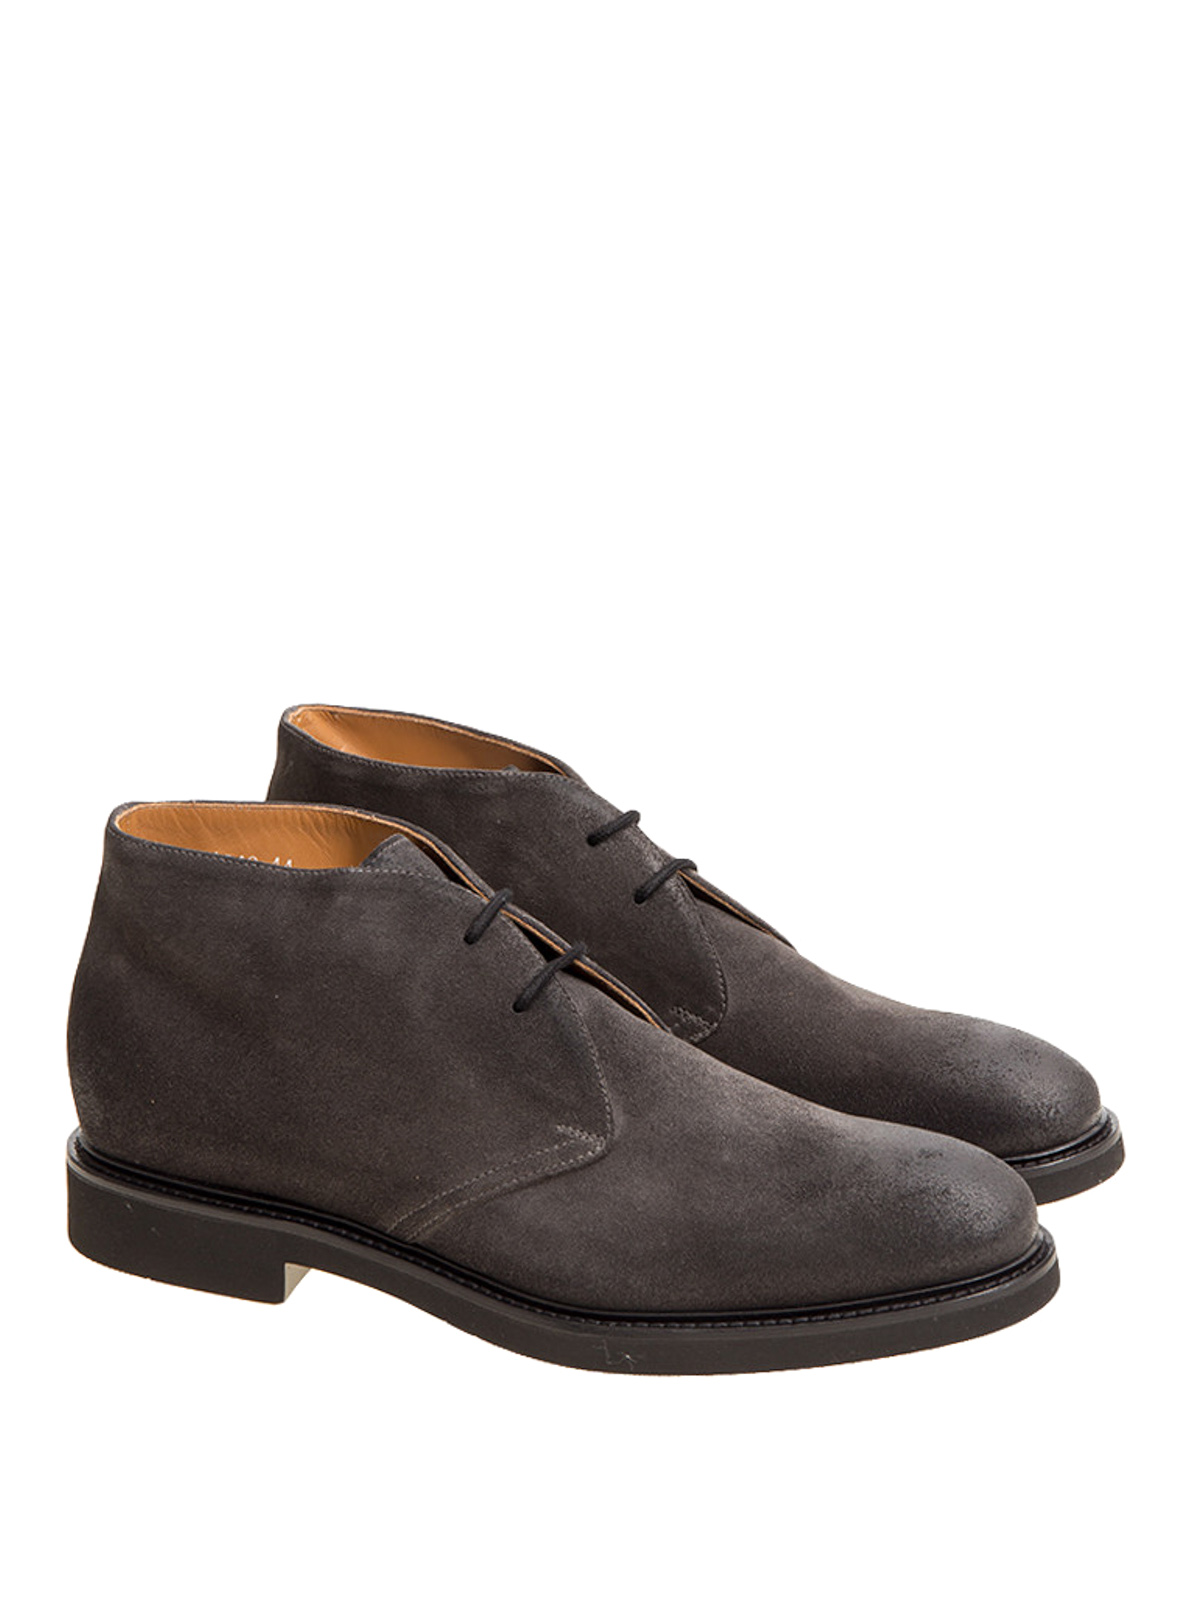 Doucal's - Suede laced-up desert boots 